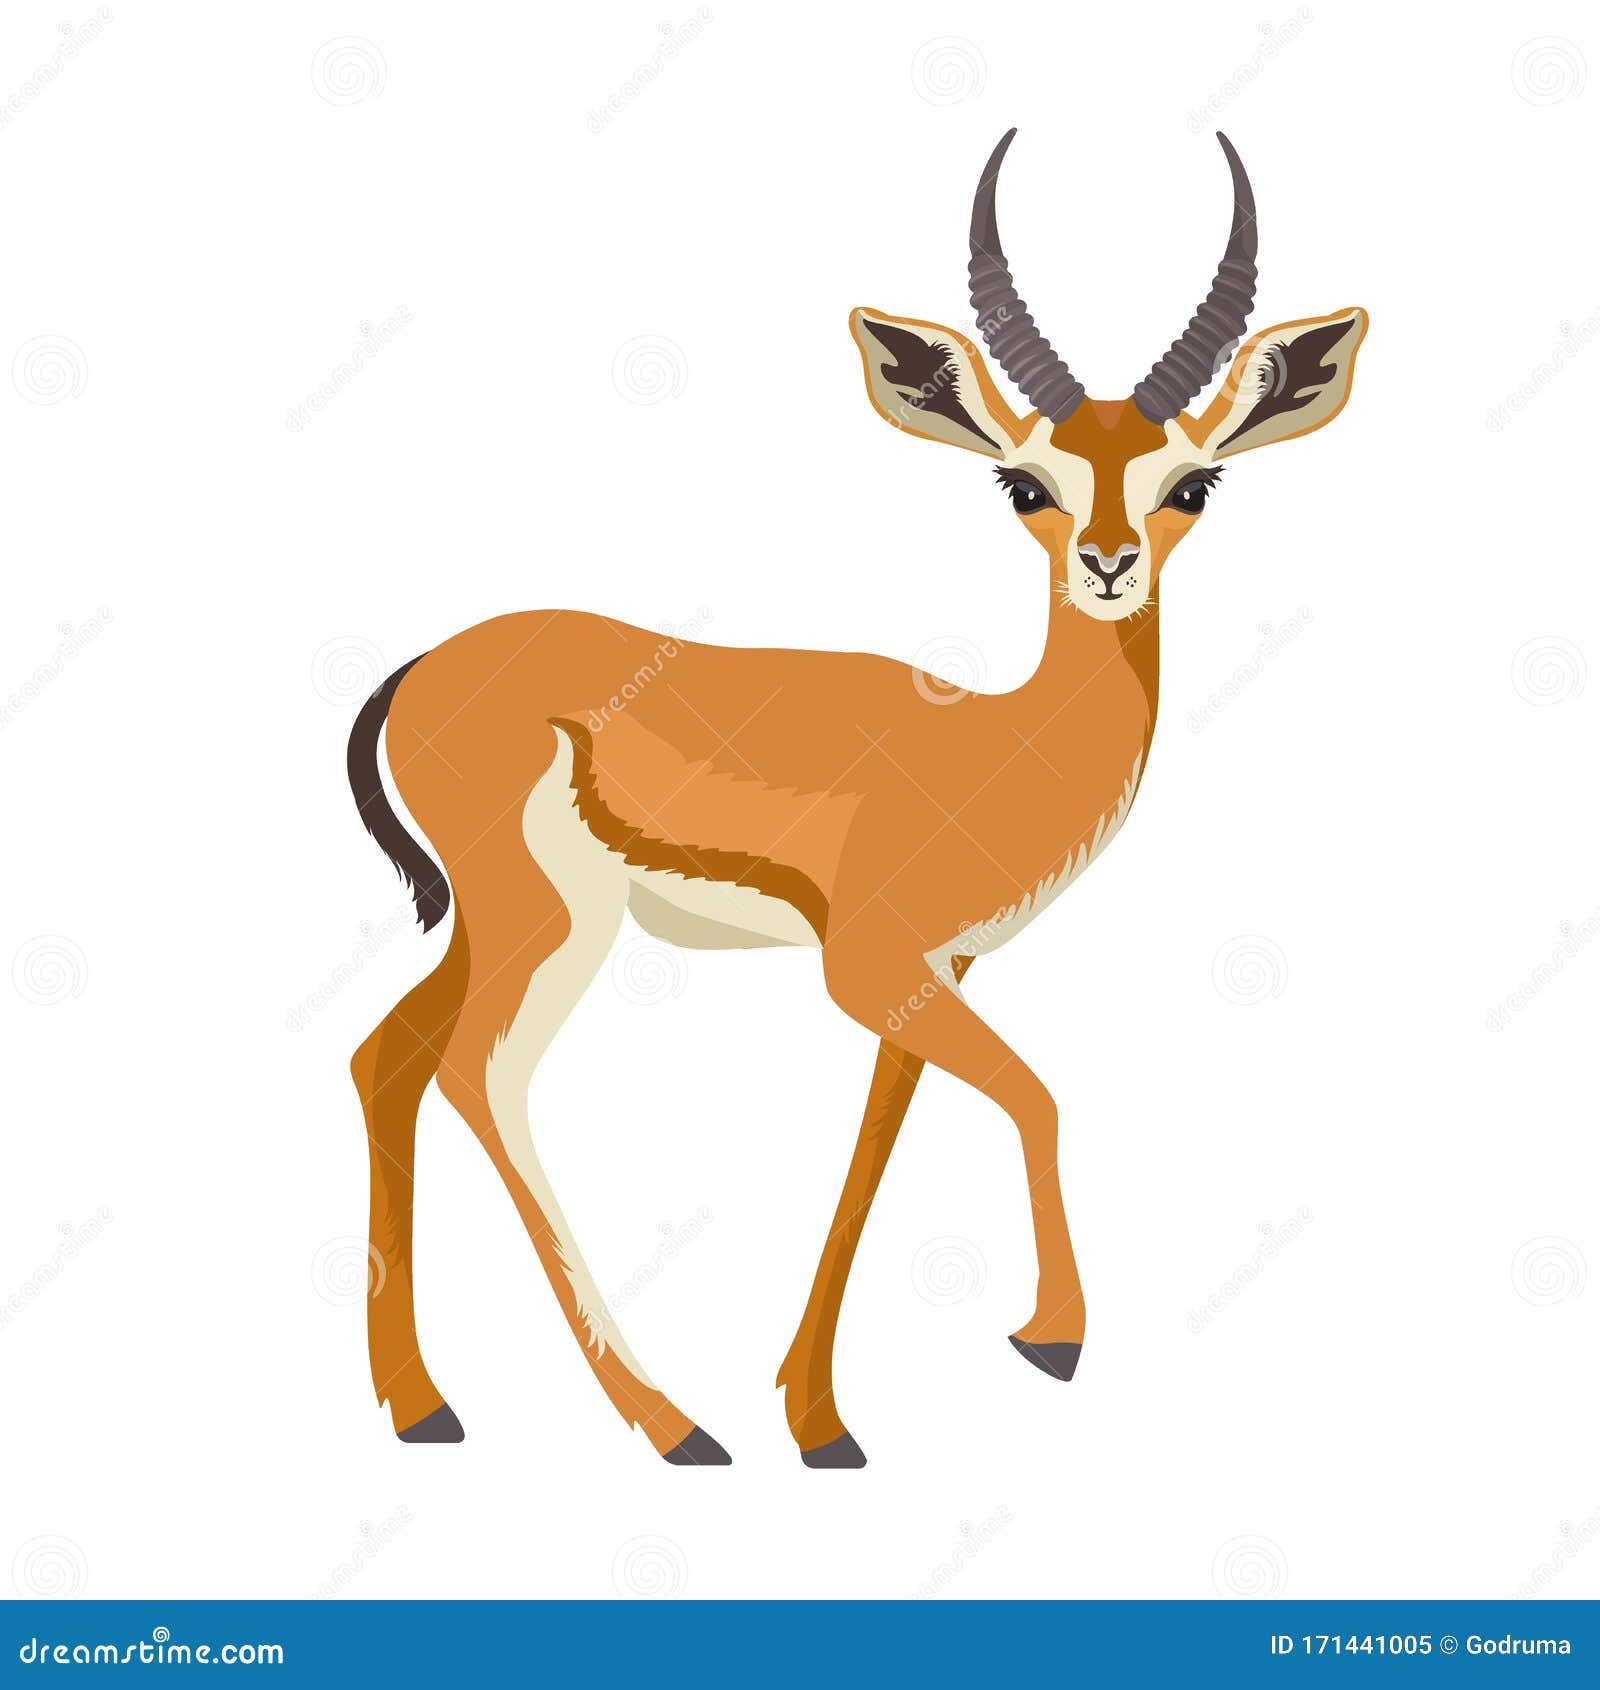 gazelle or antelope with horn. african mammal animal in wildlife. 